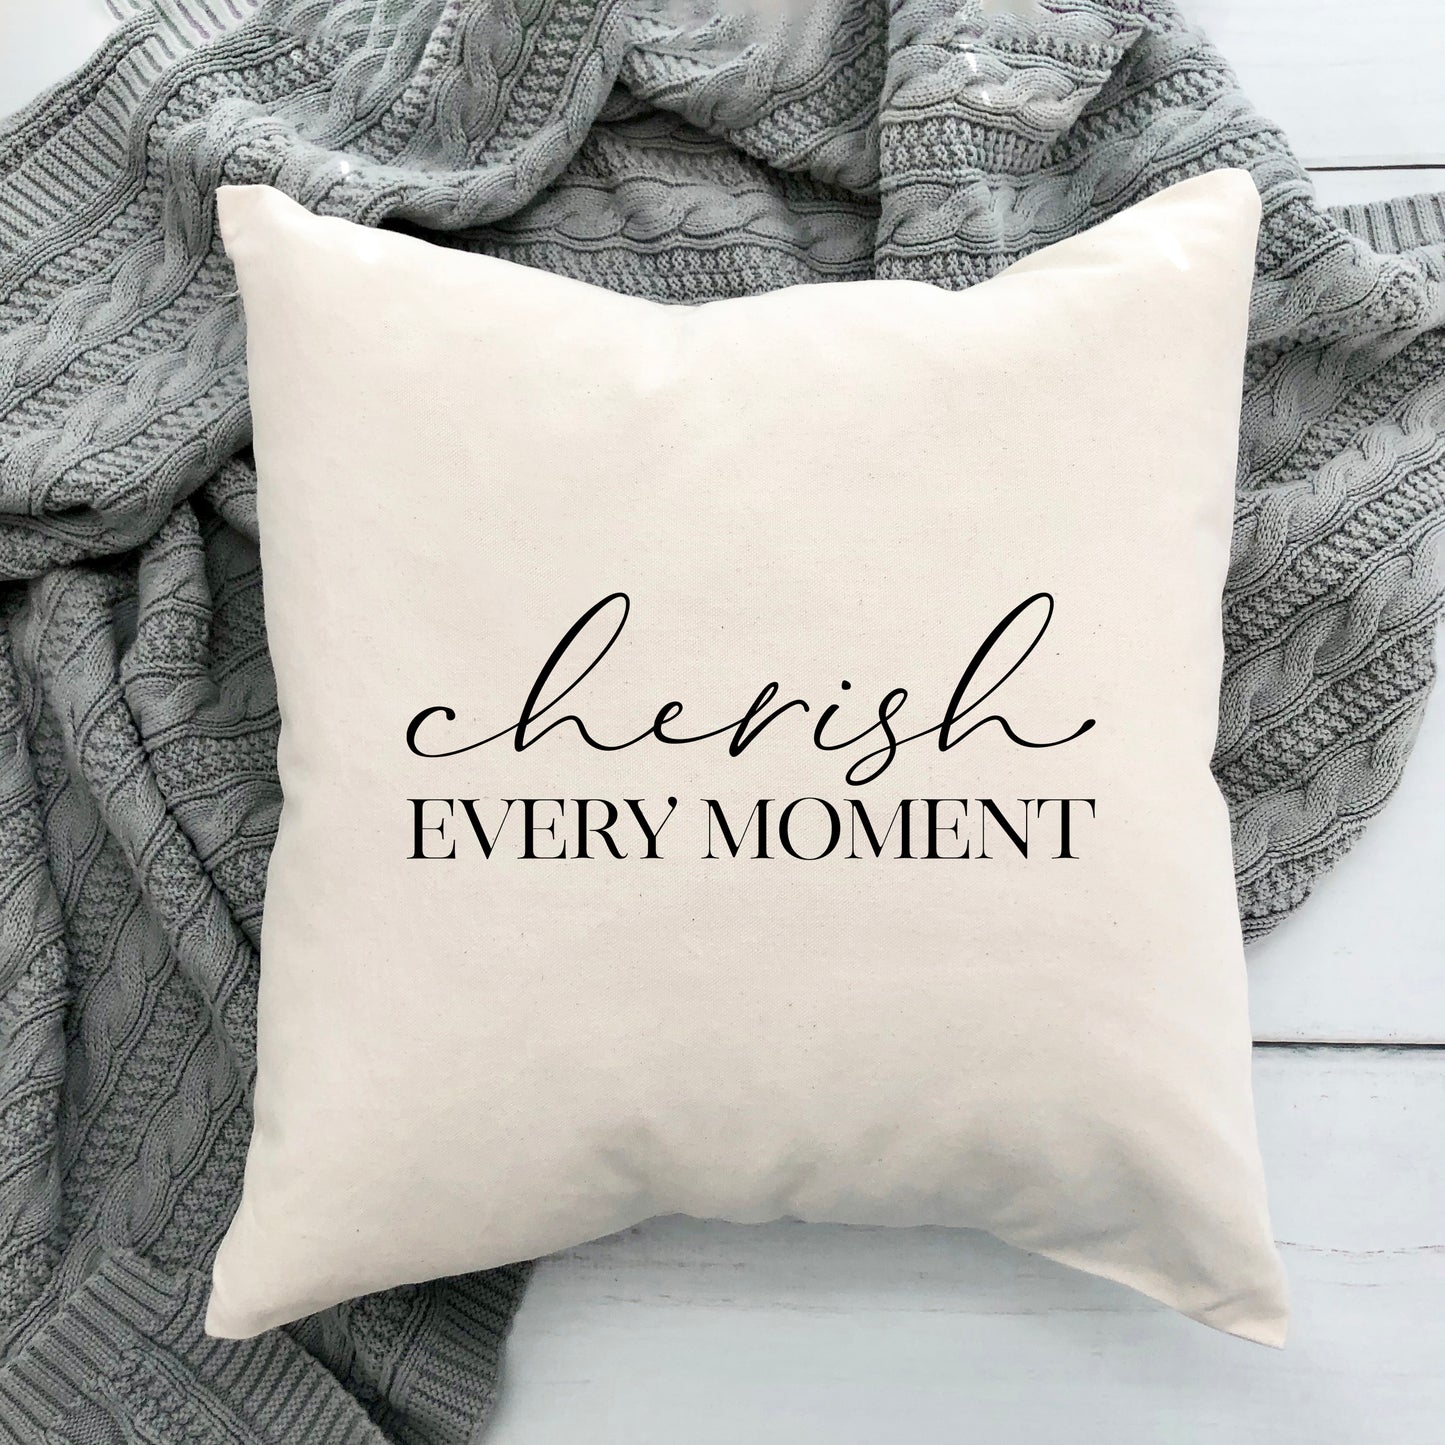 Cherish Every Moment | Pillow Cover